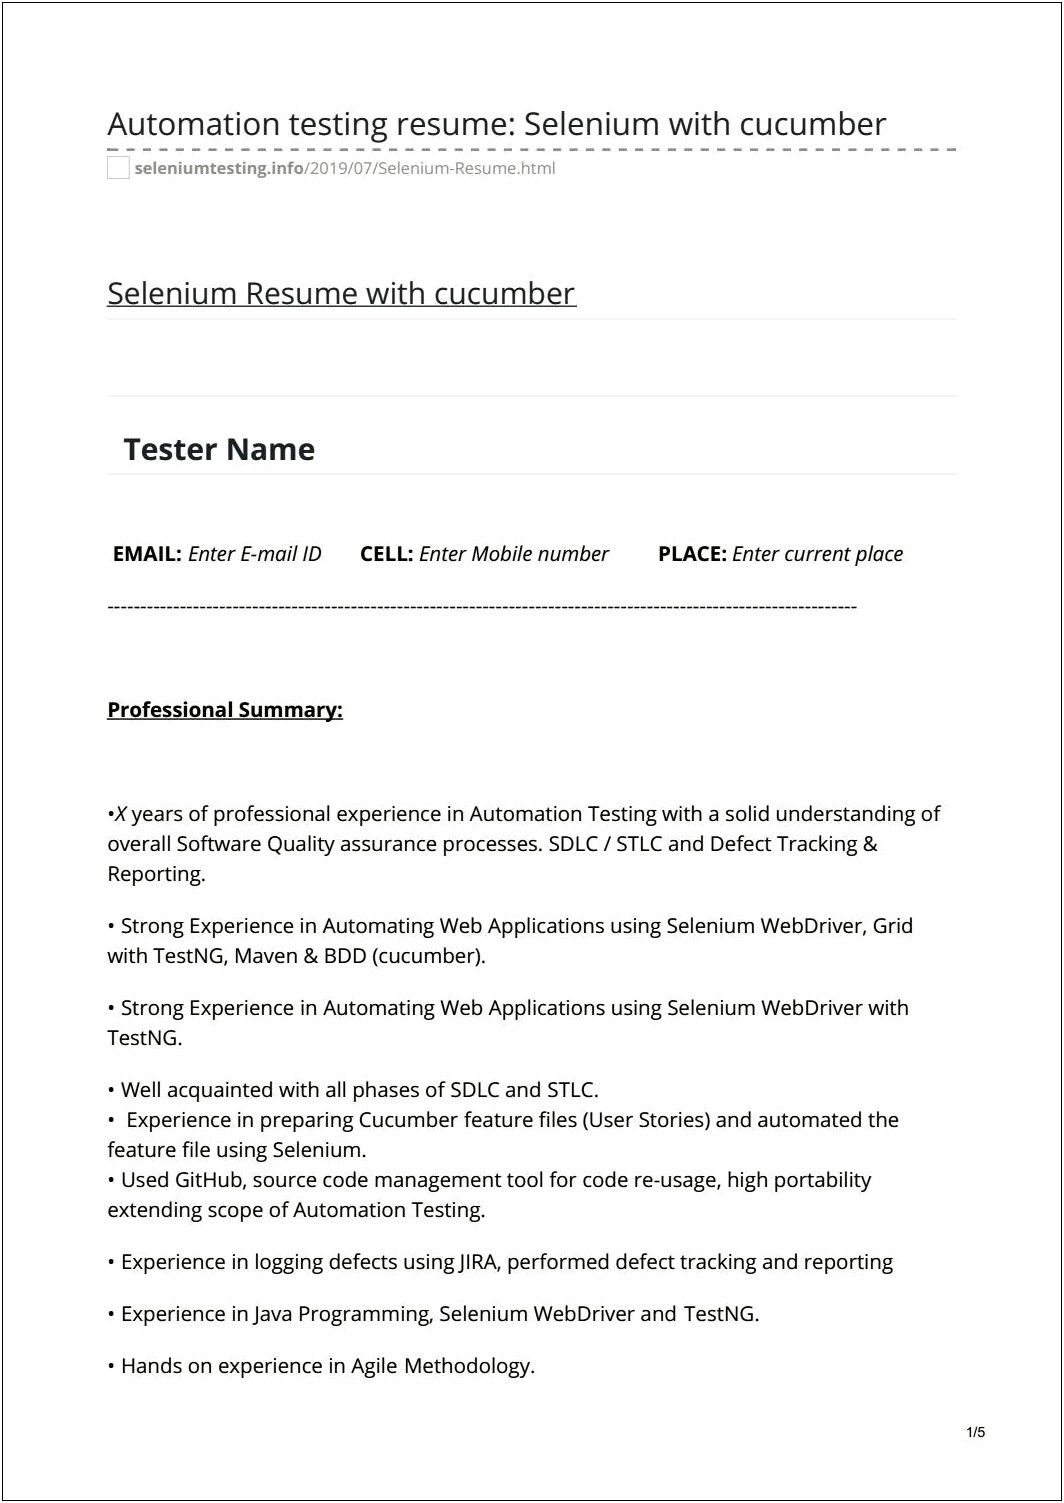 Resume For Selenium Testing With 1 Year Experience